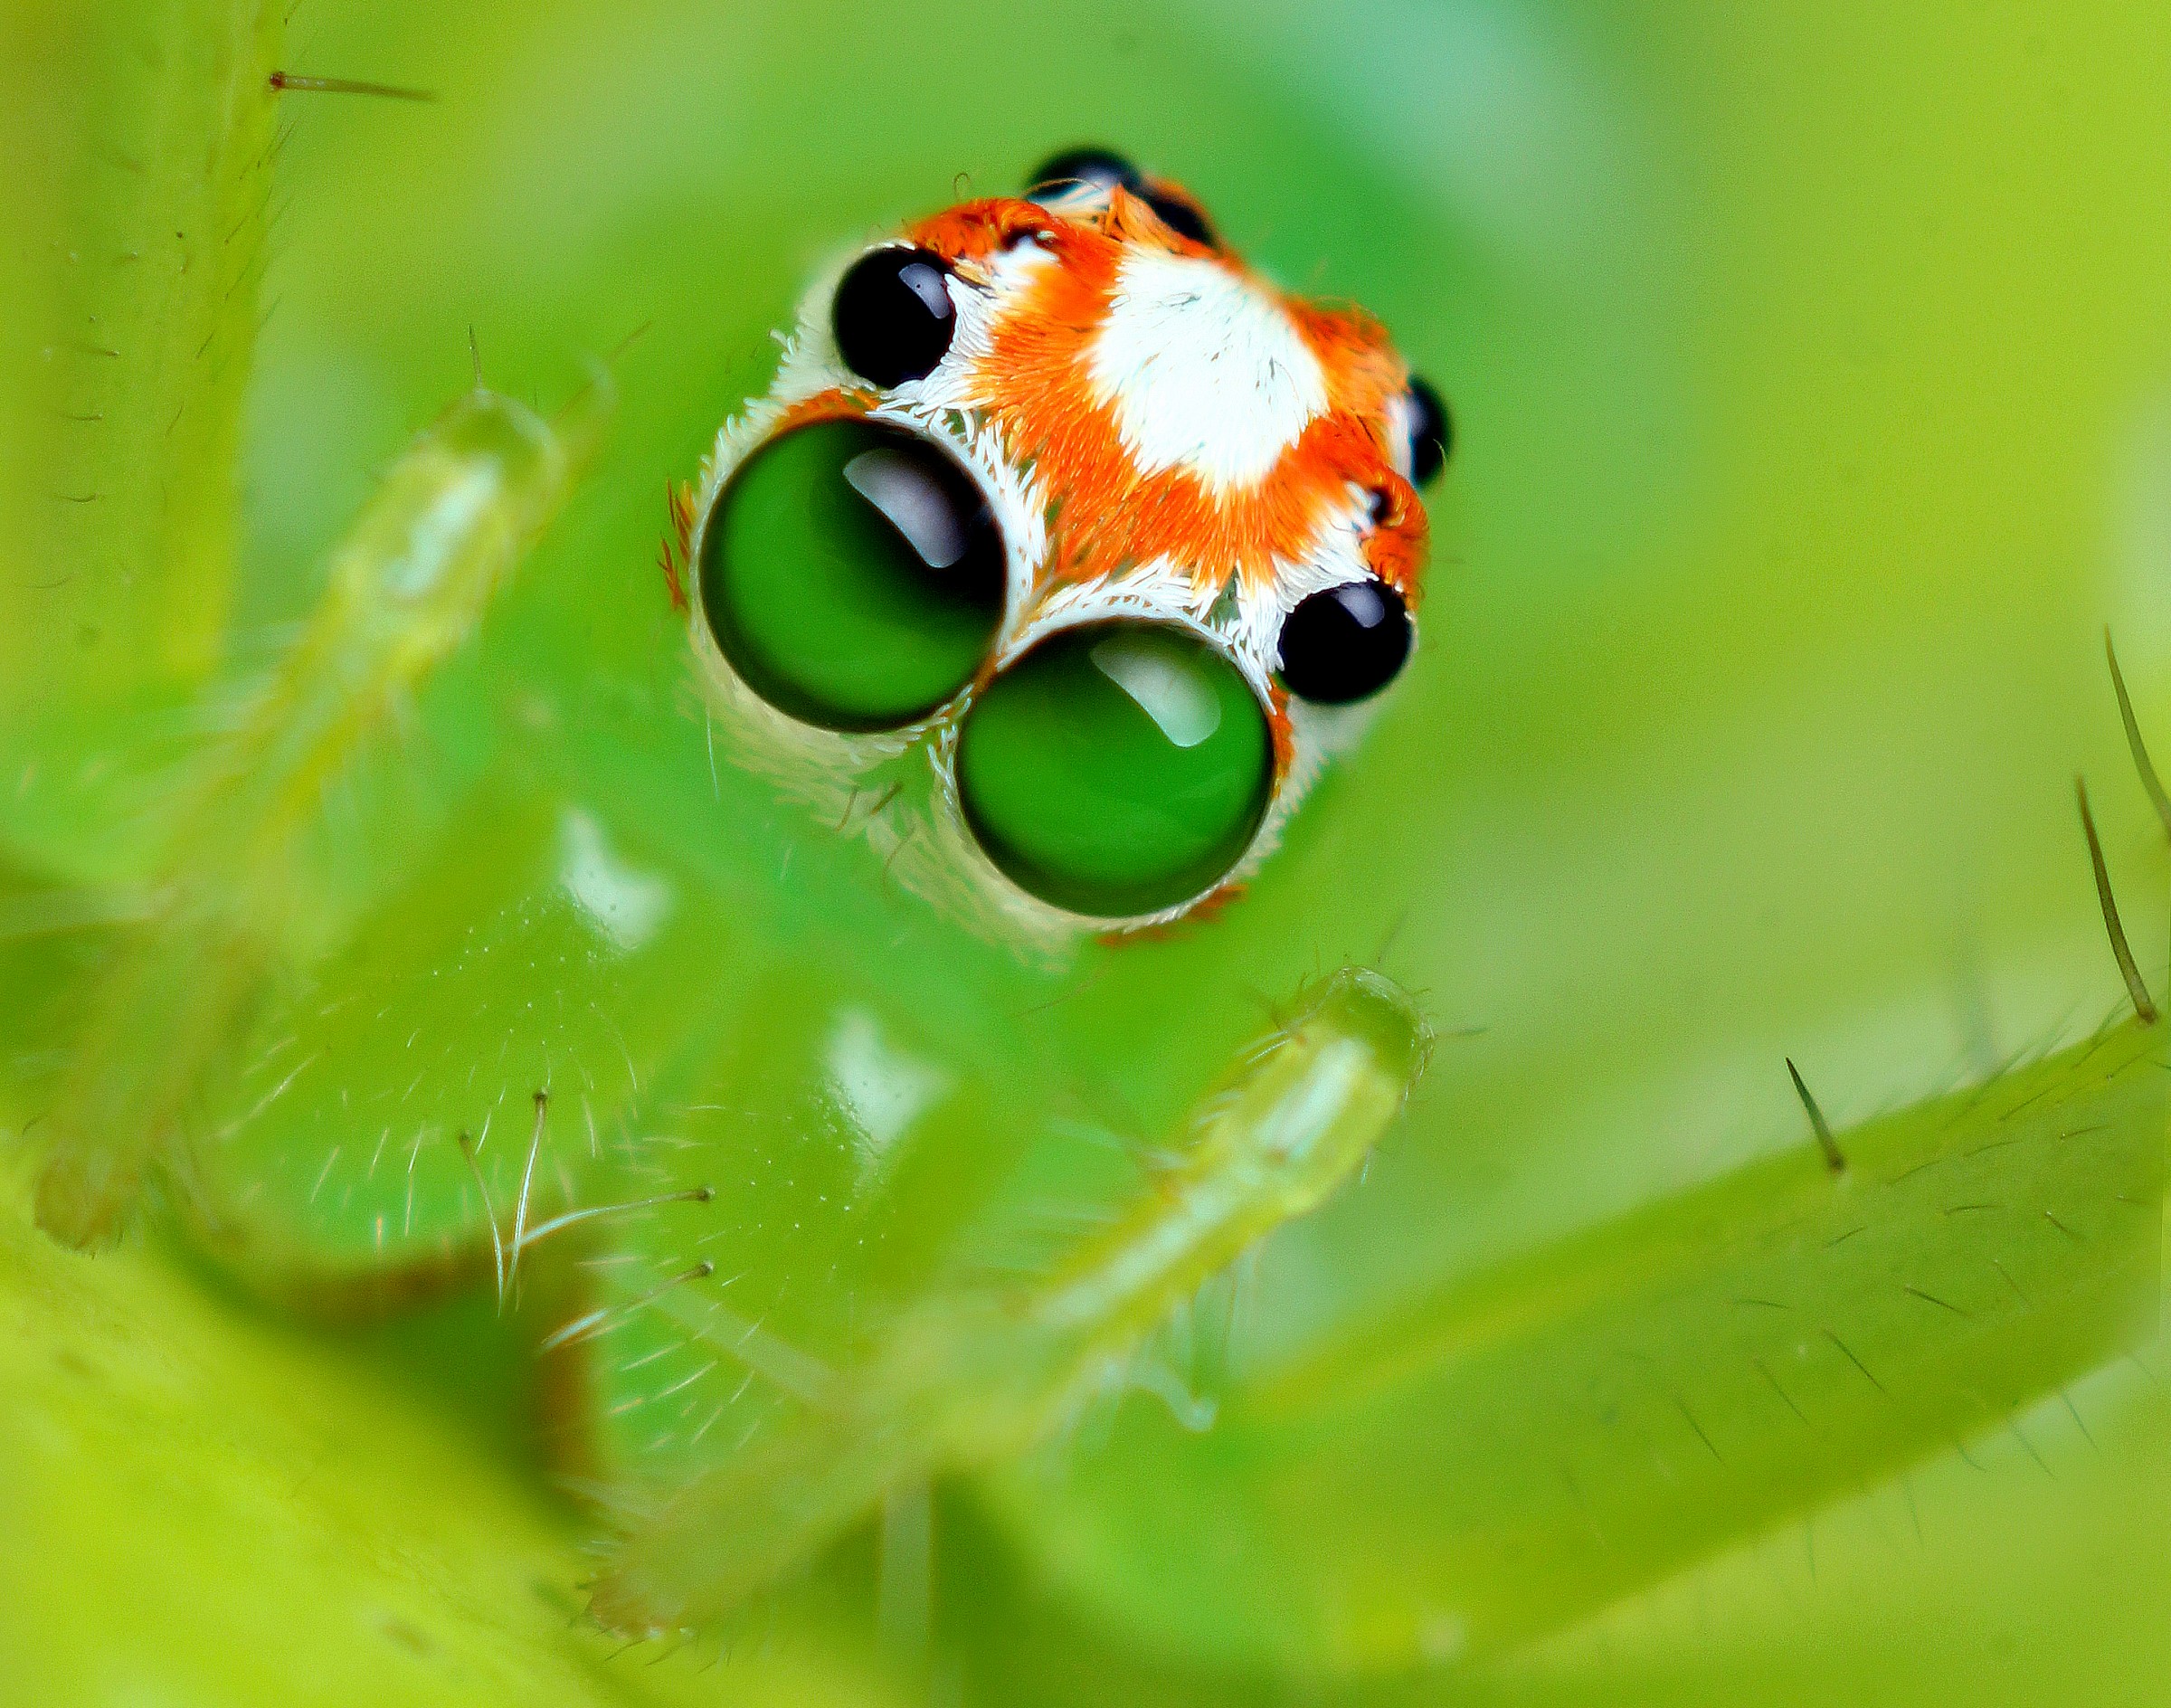 Female Magnolia Green Jumping Spider...